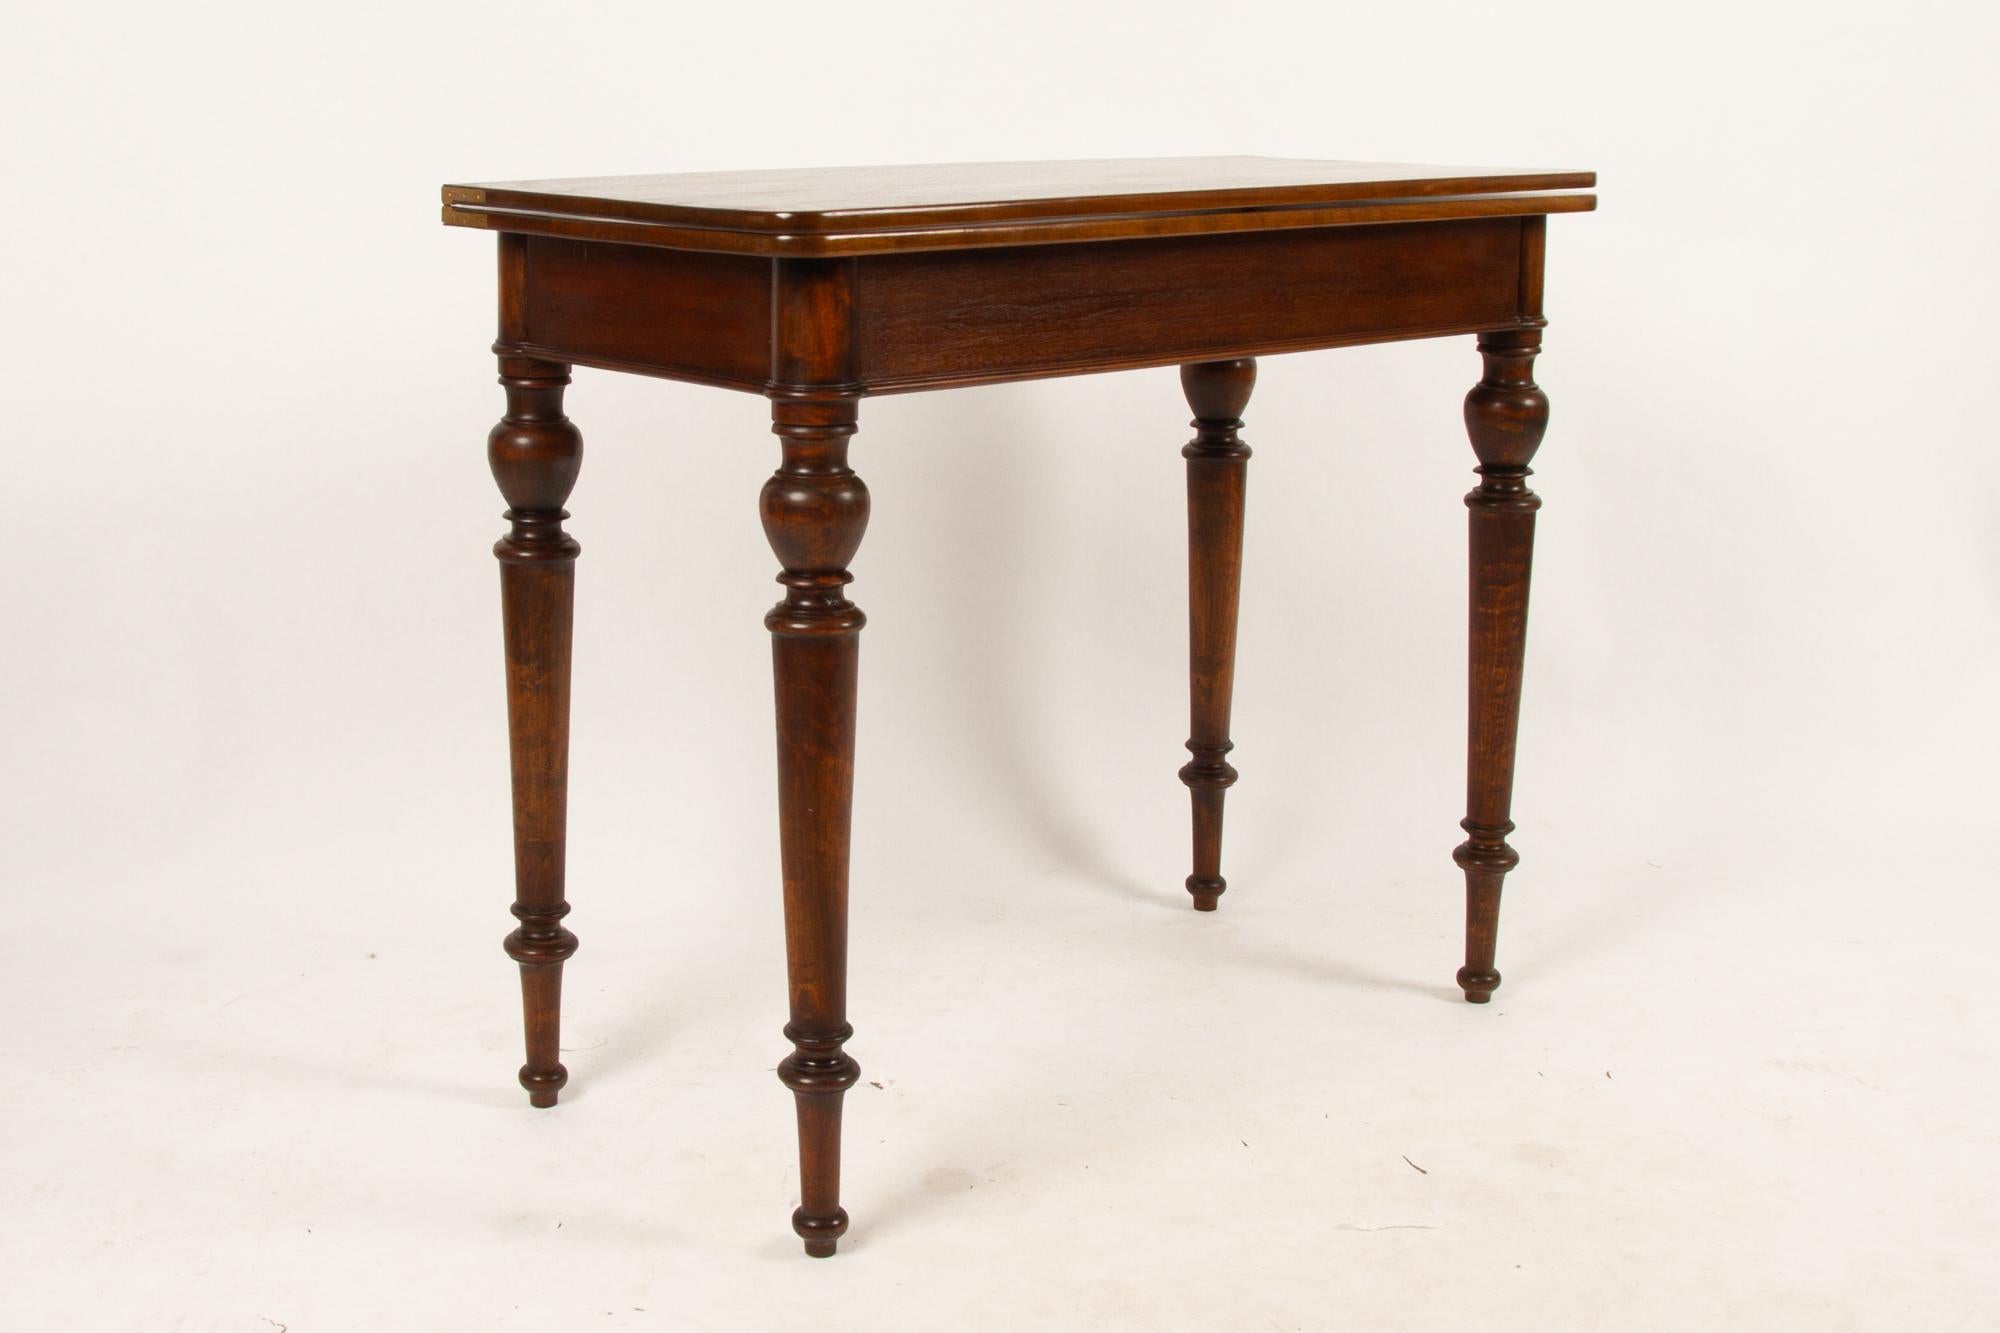 Antique mahogany game table, late 19th century.
Danish game table with flip top.
Good original condition. Gently cleaned and polished.
Size of tabletop: Open 88 x 94.5 cm, closed 44 x 94.5.